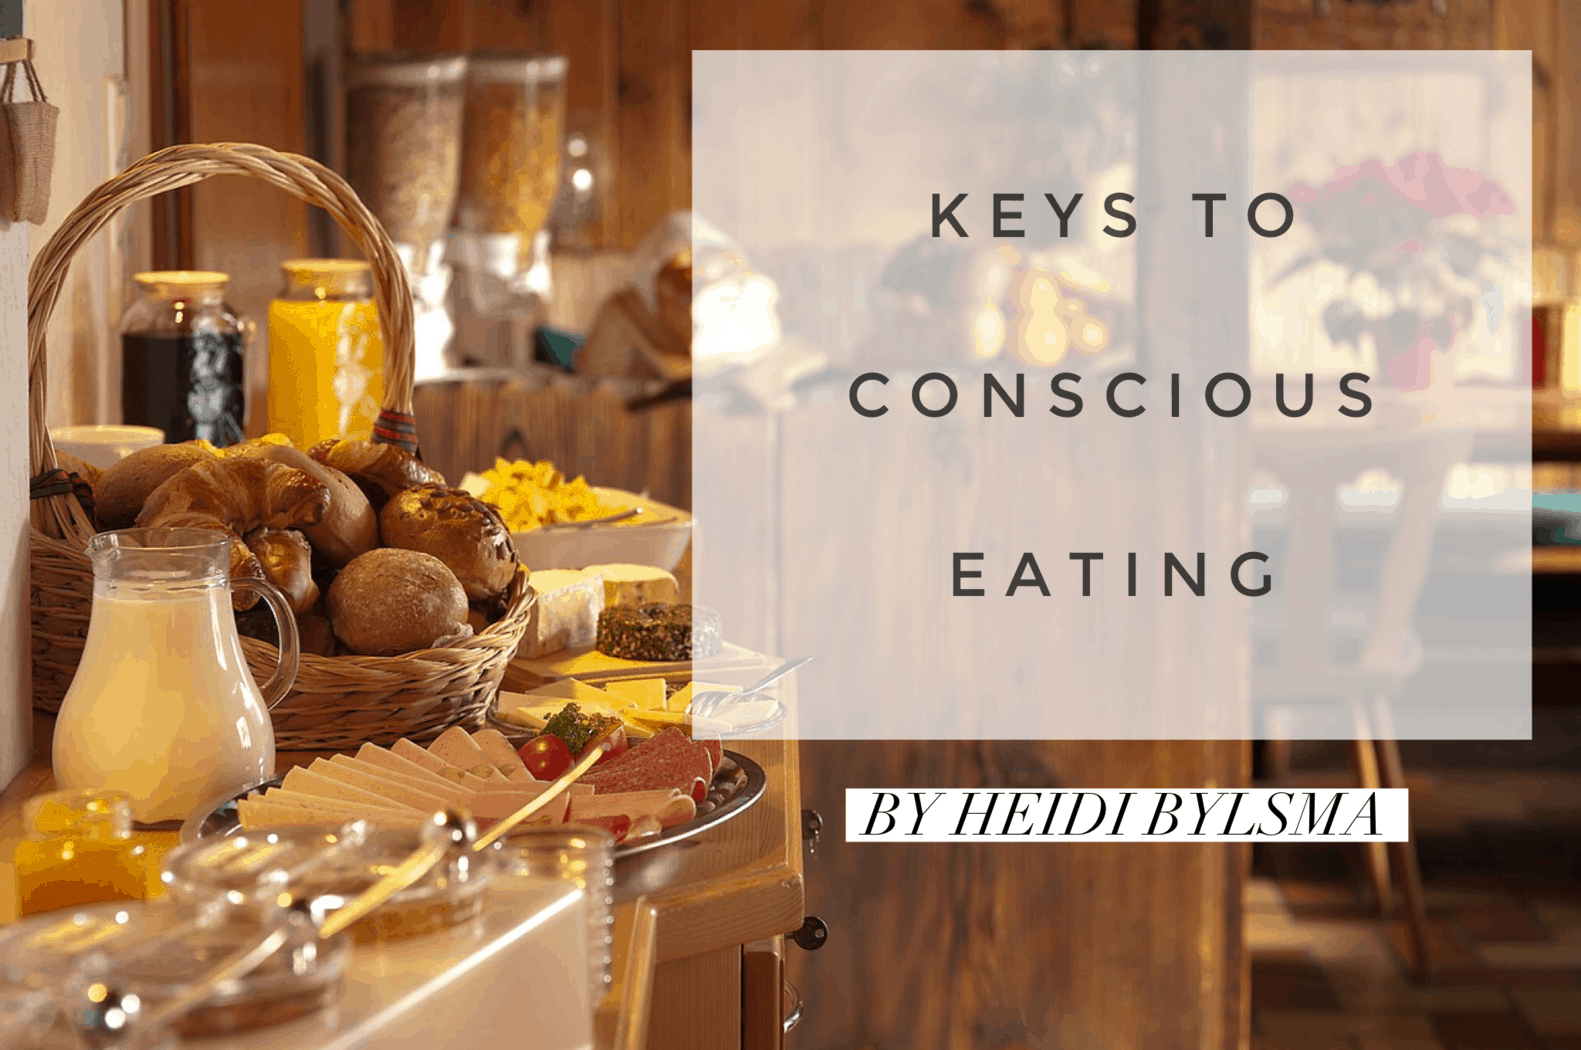 Keys to Conscious Eating